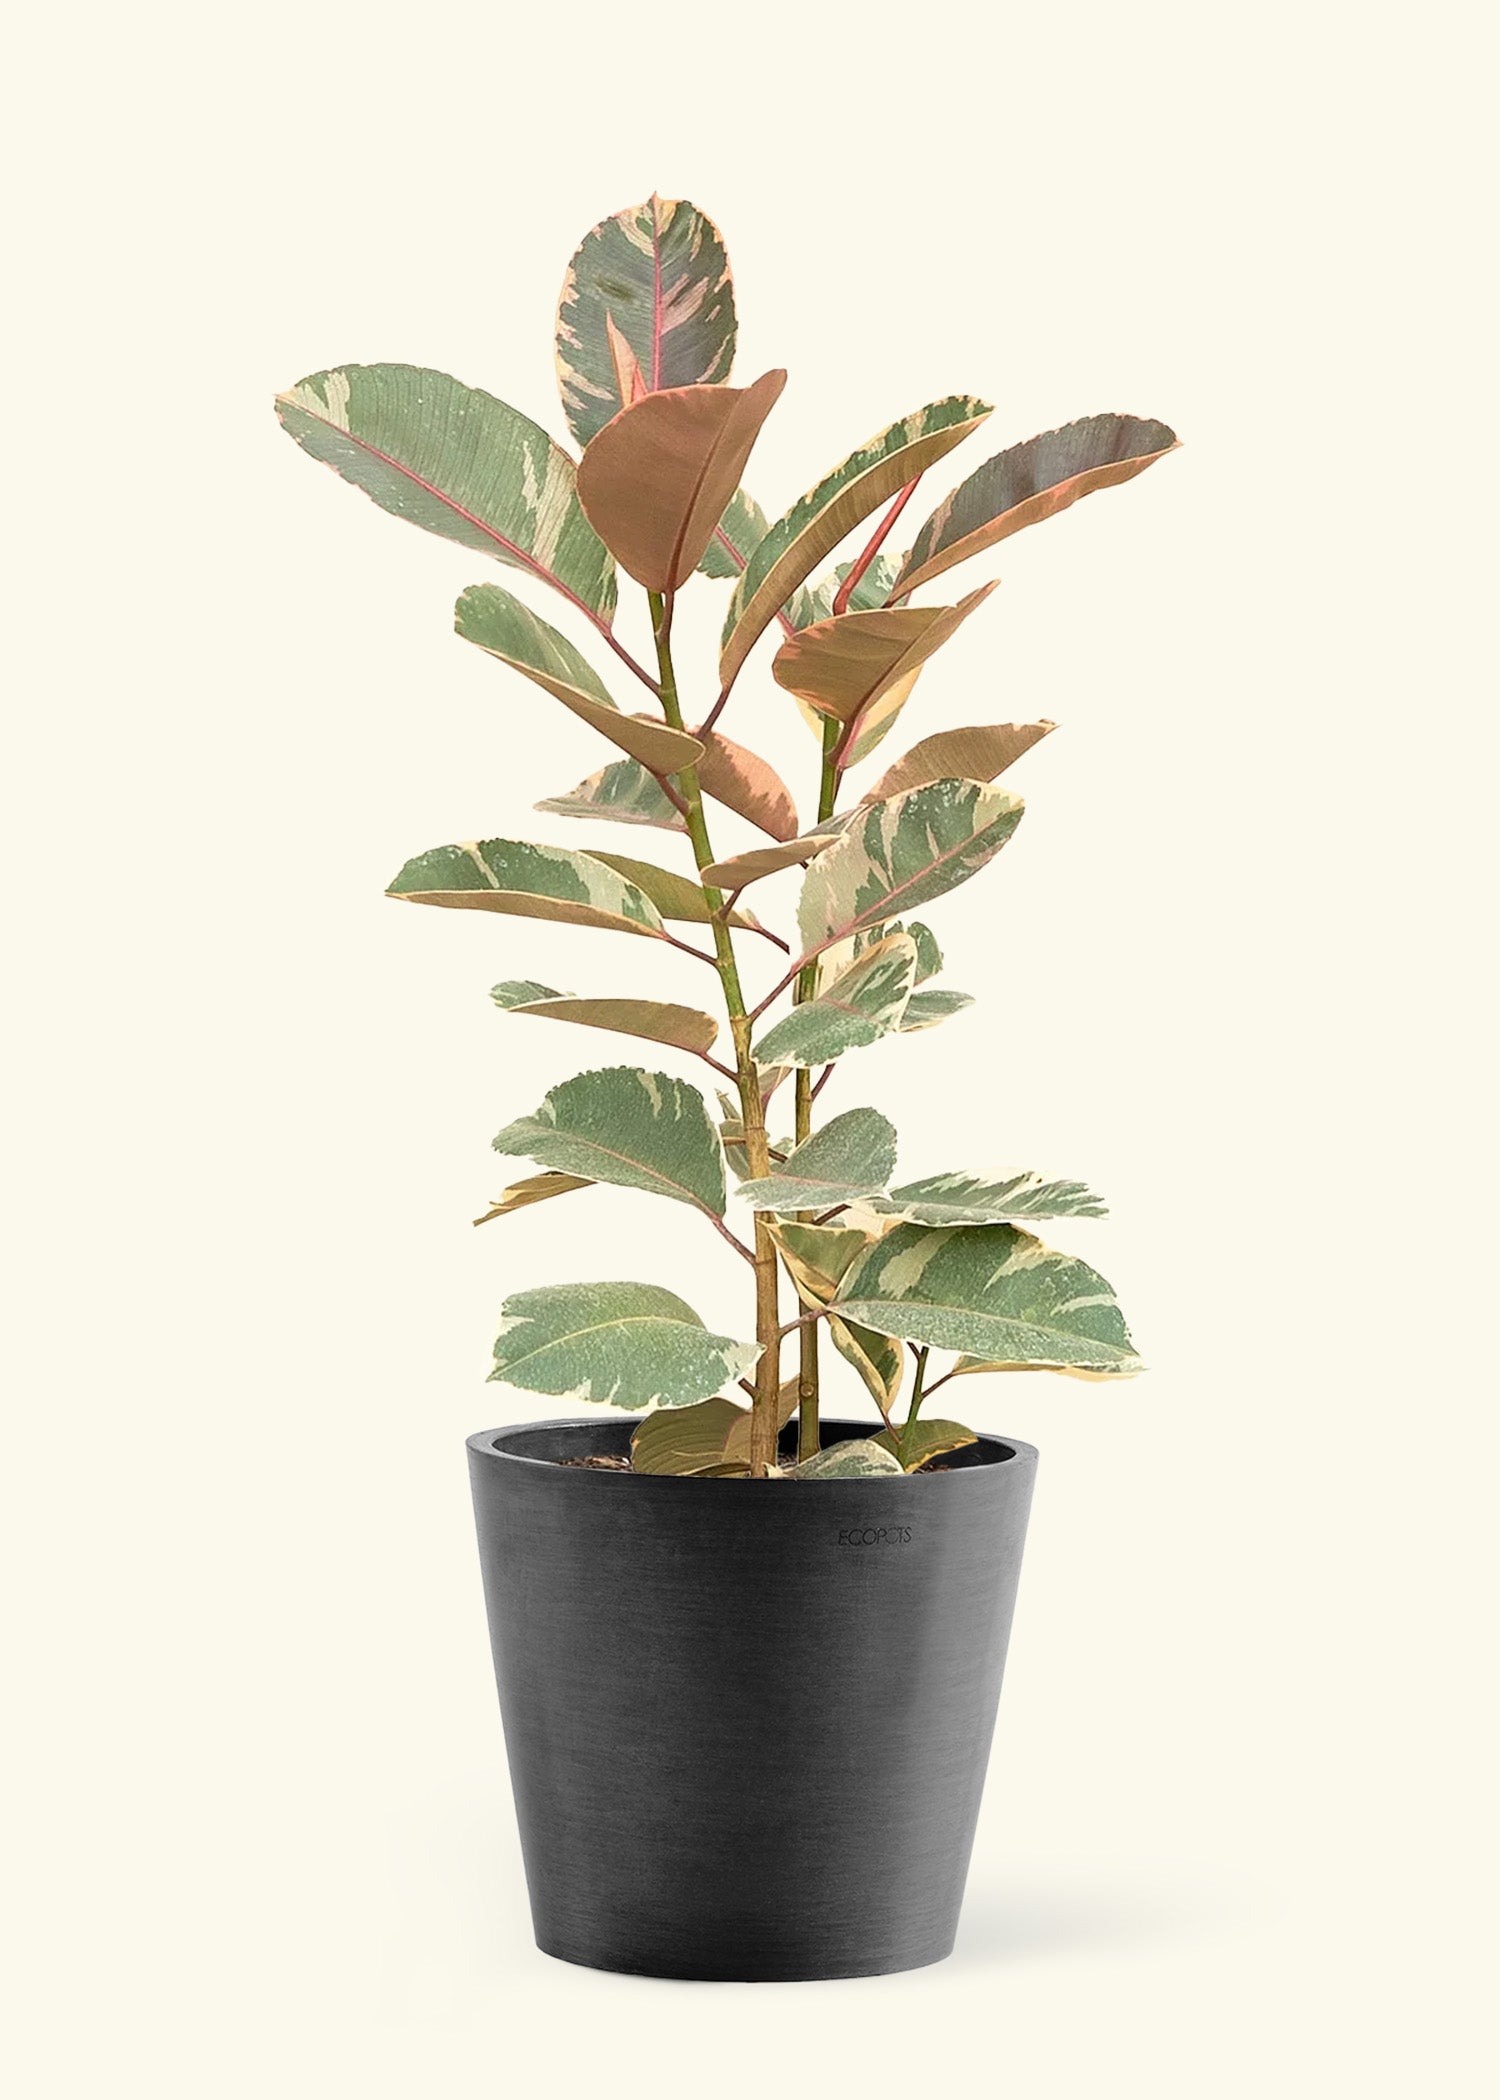 Large Ruby Rubber Tree in a black pot.